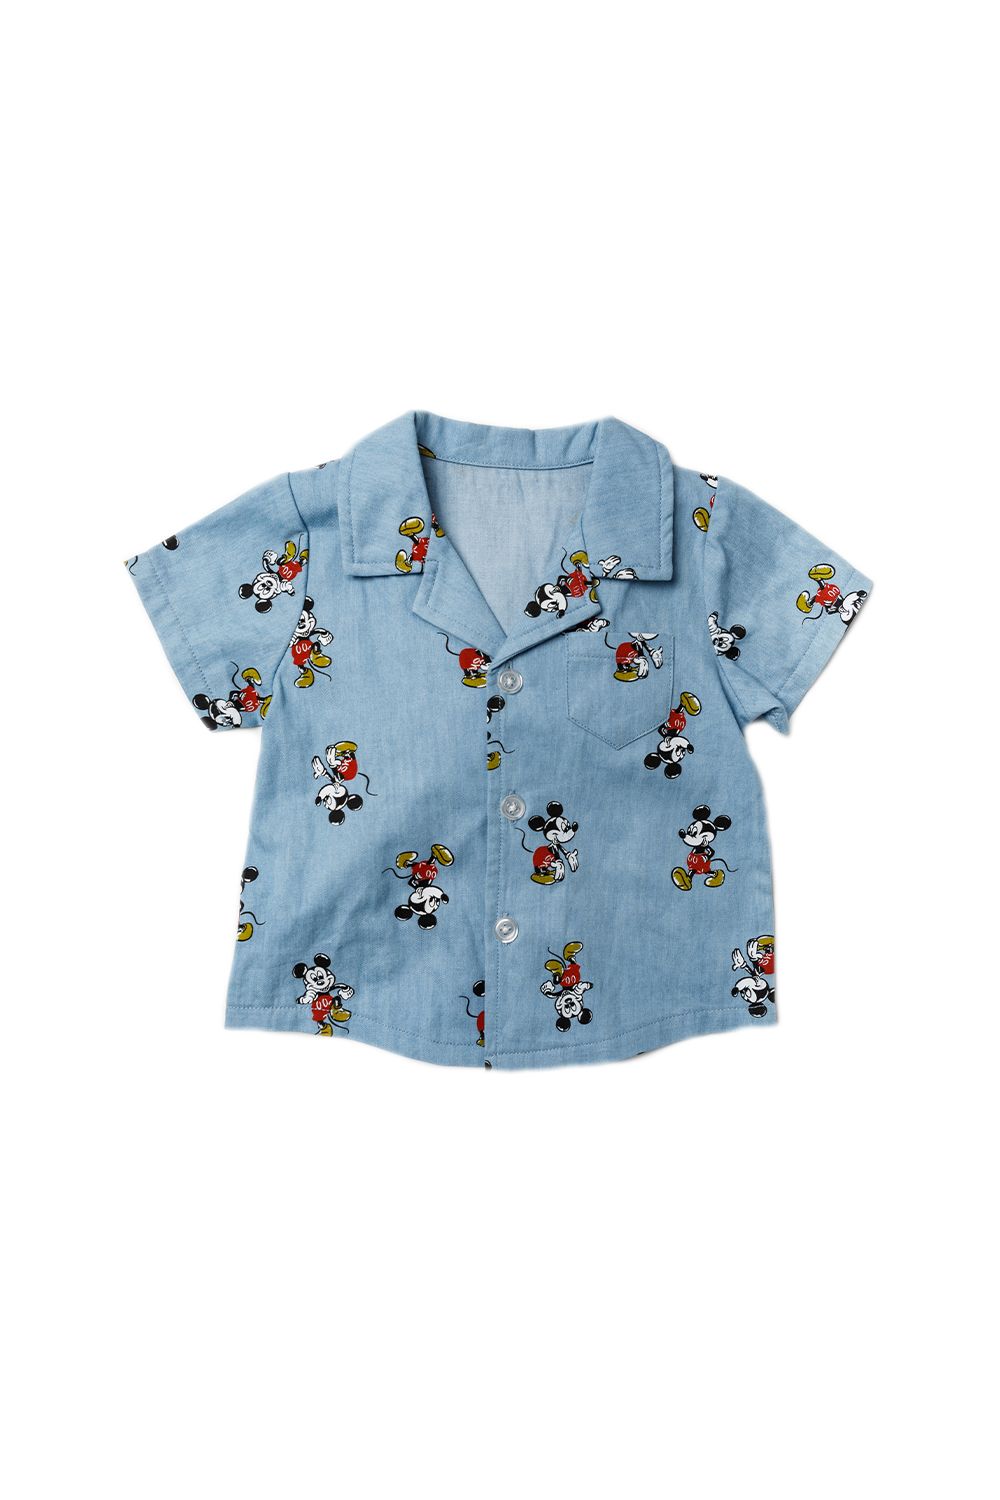 This adorable Disney Baby two-piece set features a classic Mickey Mouse print. The set includes a printed, button up shirt and a pair of drawstring shorts. Both the shirt and shorts are cotton, keeping your little one comfortable. This set would make a lovely gift or a new addition to your little ones wardrobe!